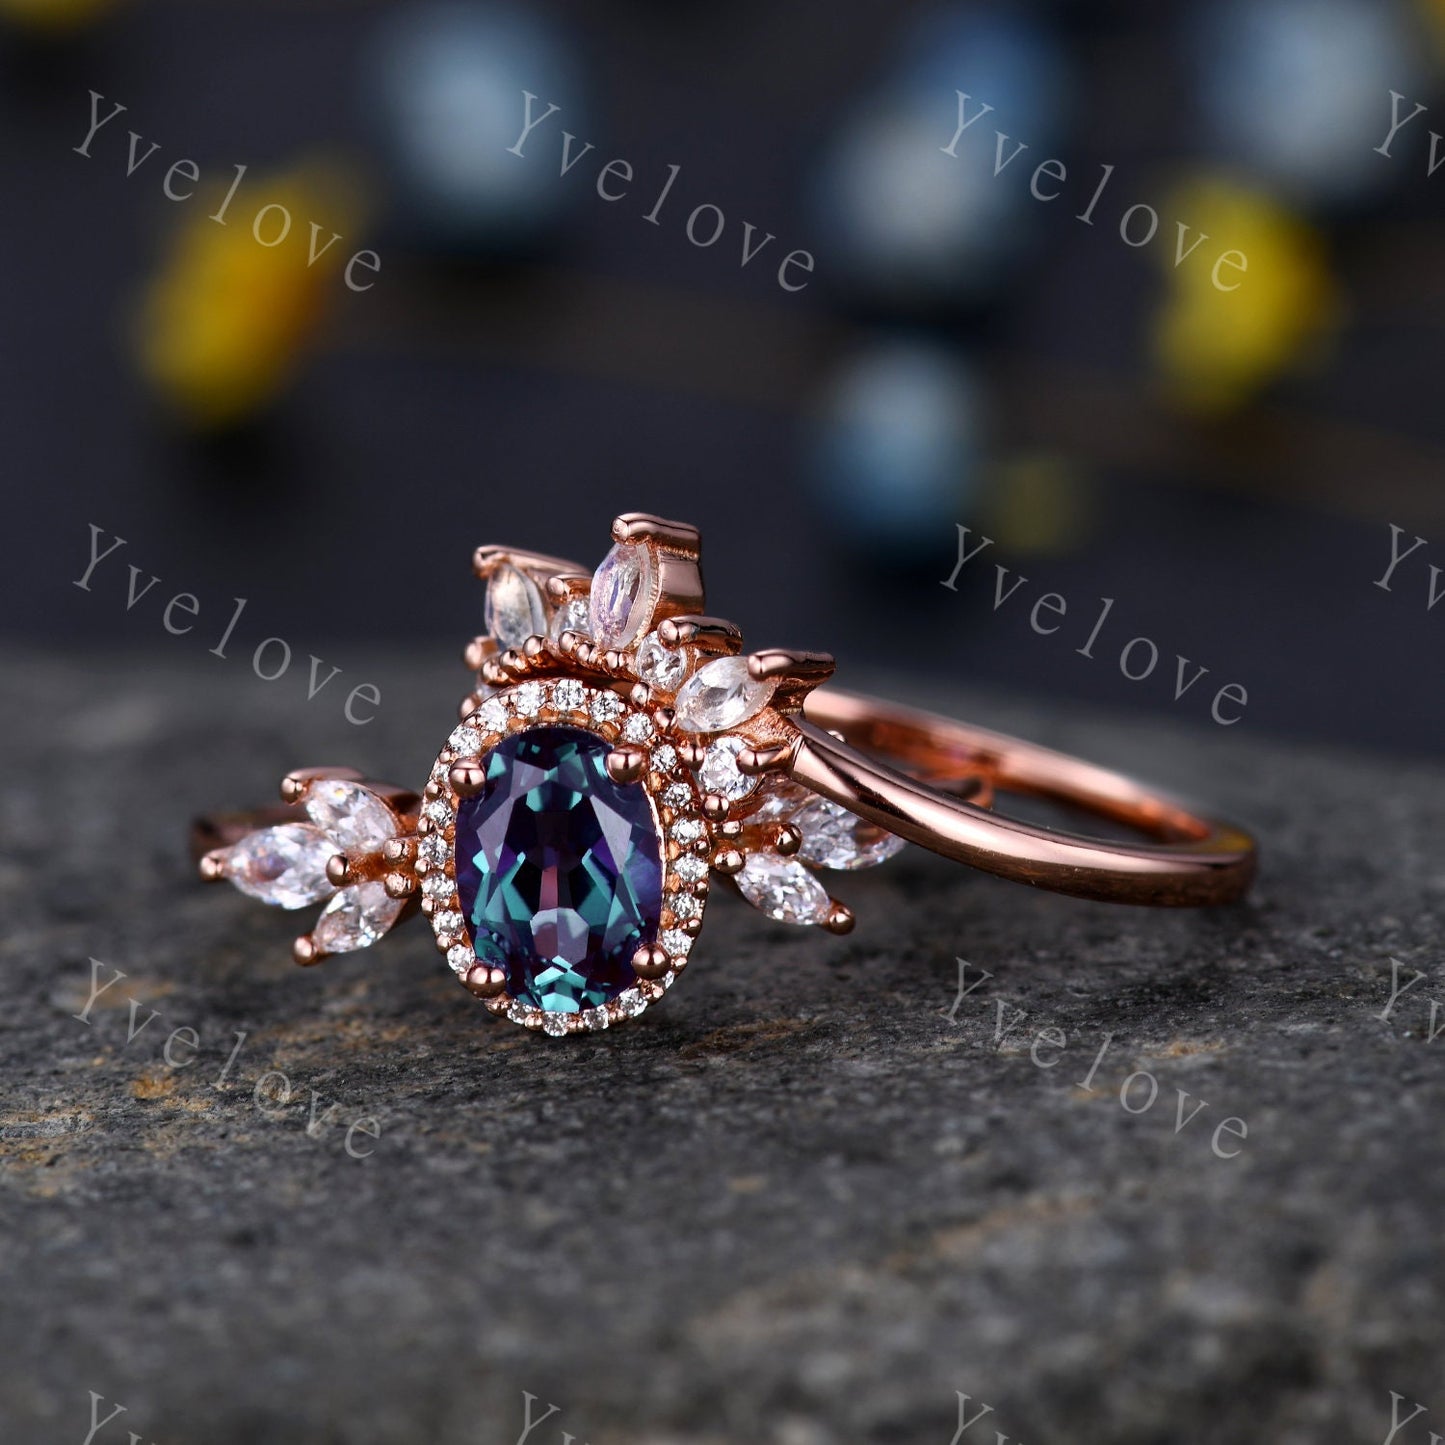 Vintage Style Alexandrite Engagement Ring Set Women Diamond Halo Marquise Moissanite Matching Band Stacking Ring Set Unique Gift Marry her